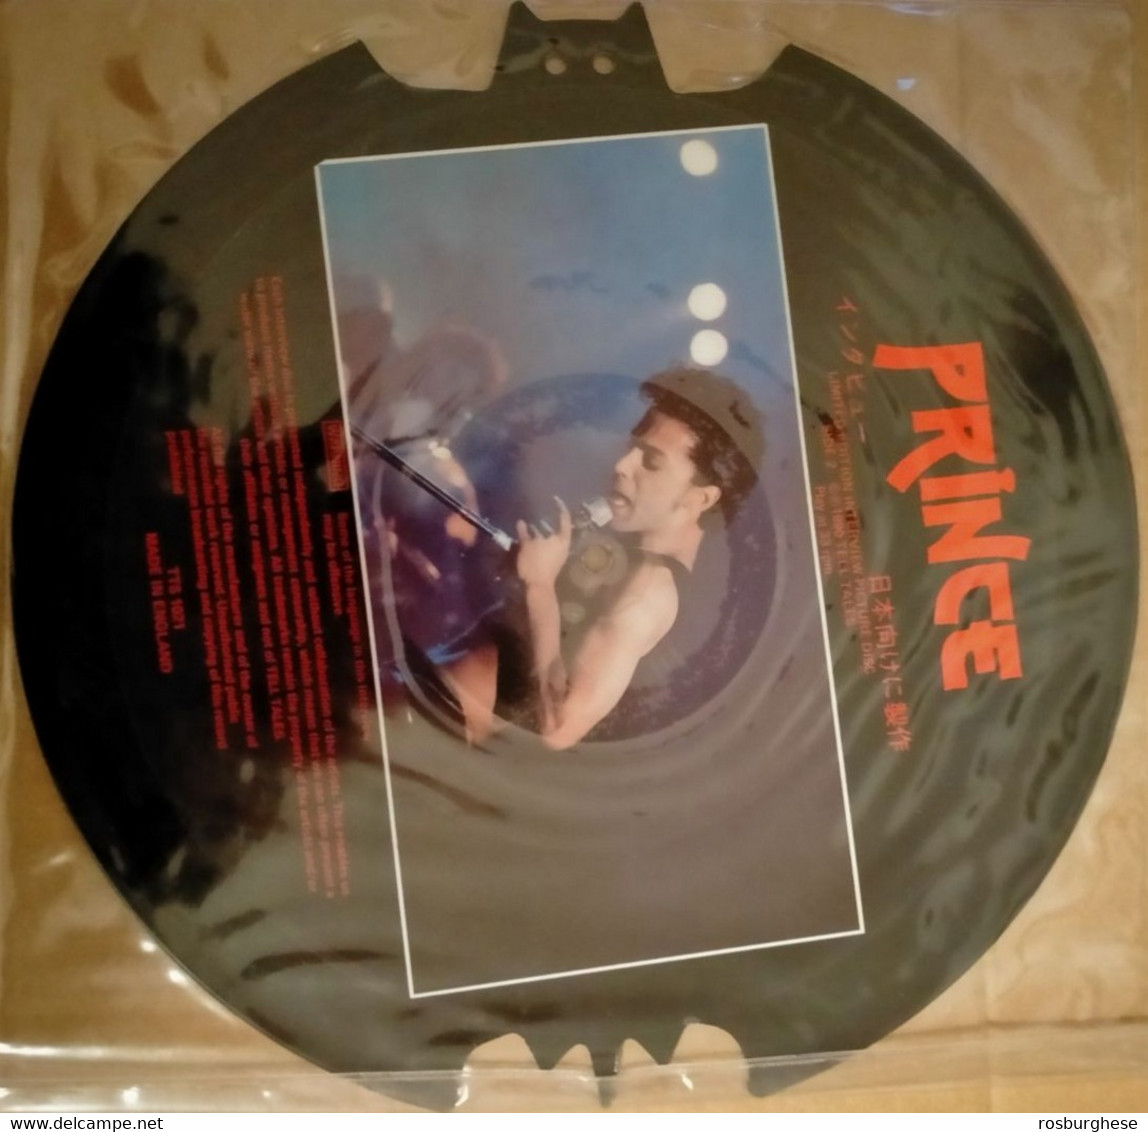 Prince An Interview With Prince 12" VINIKE SHAPE Picture Forma Di Pipistrello - Limited Editions